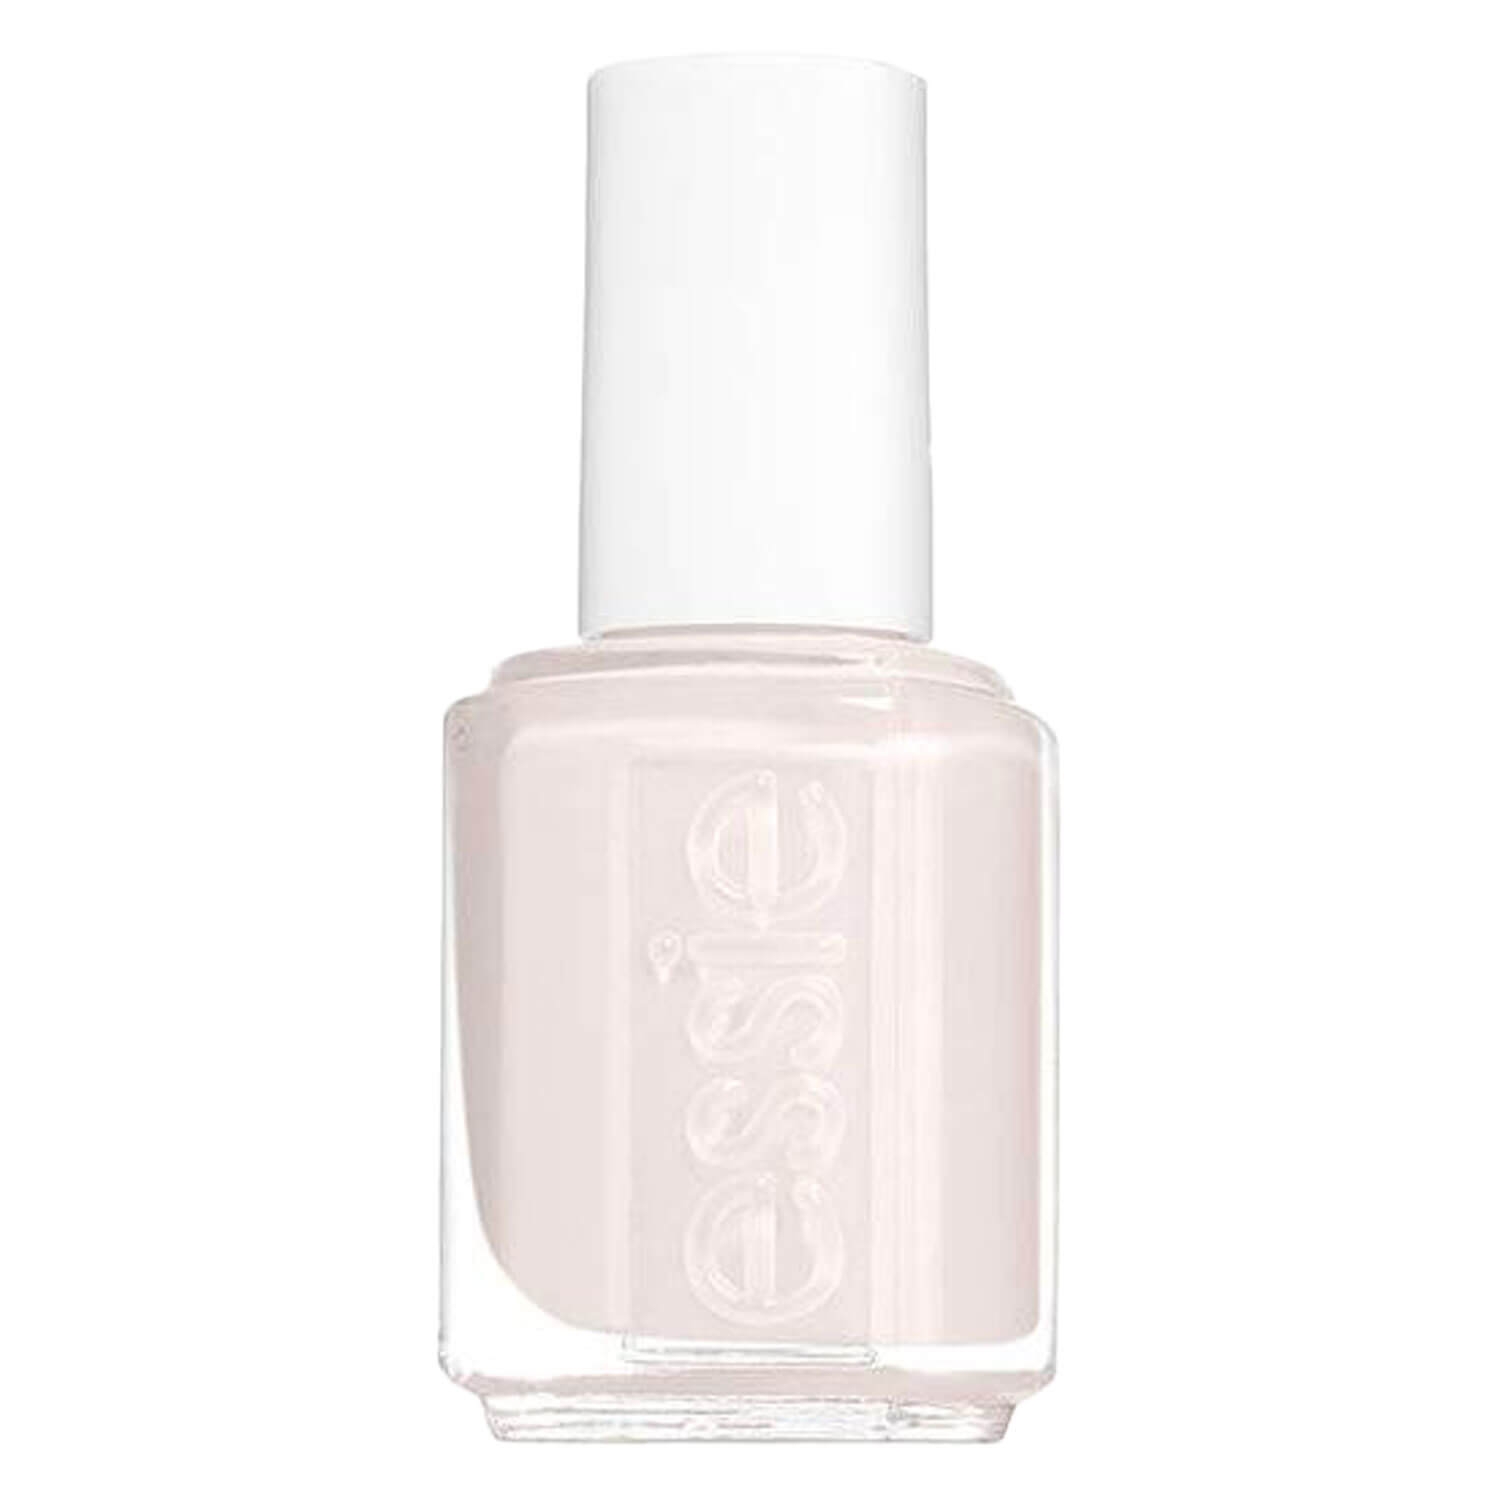 Product image from essie nail polish - marshmallow 3